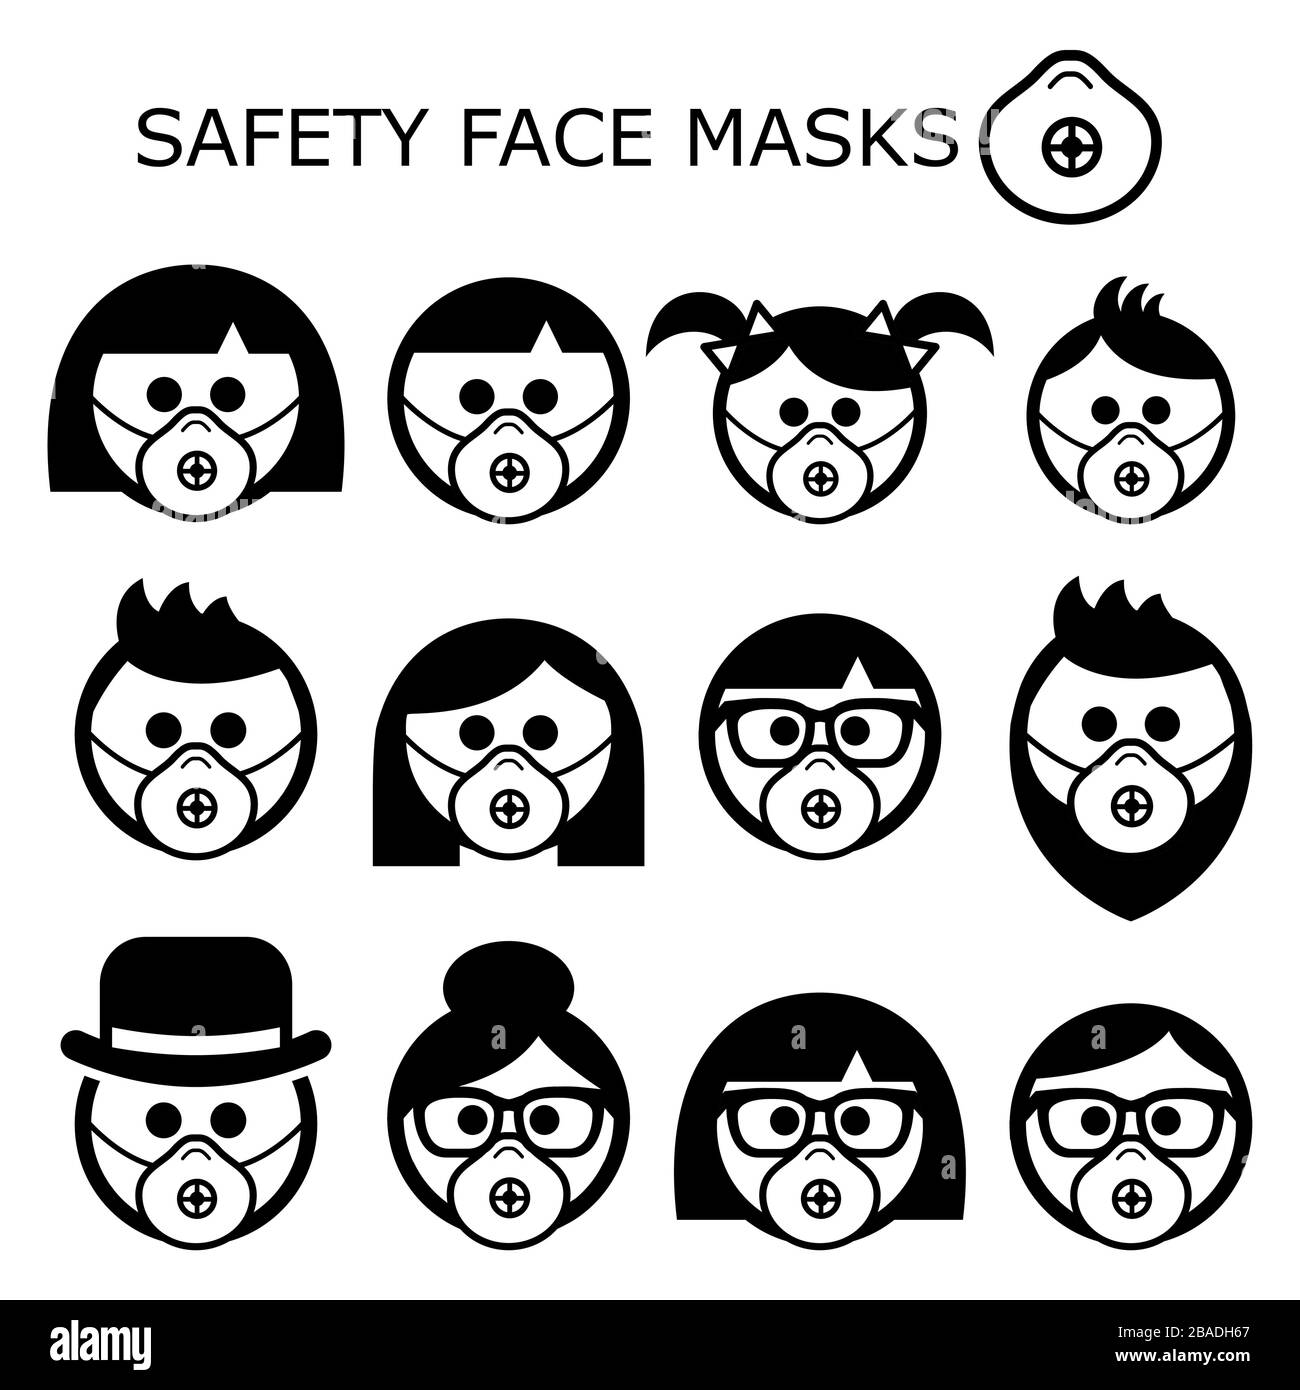 People wearing safety face masks vector icons set - adults, children, seniors, masks worn to prevent disease, virus, air pollution, contaminated air Stock Vector